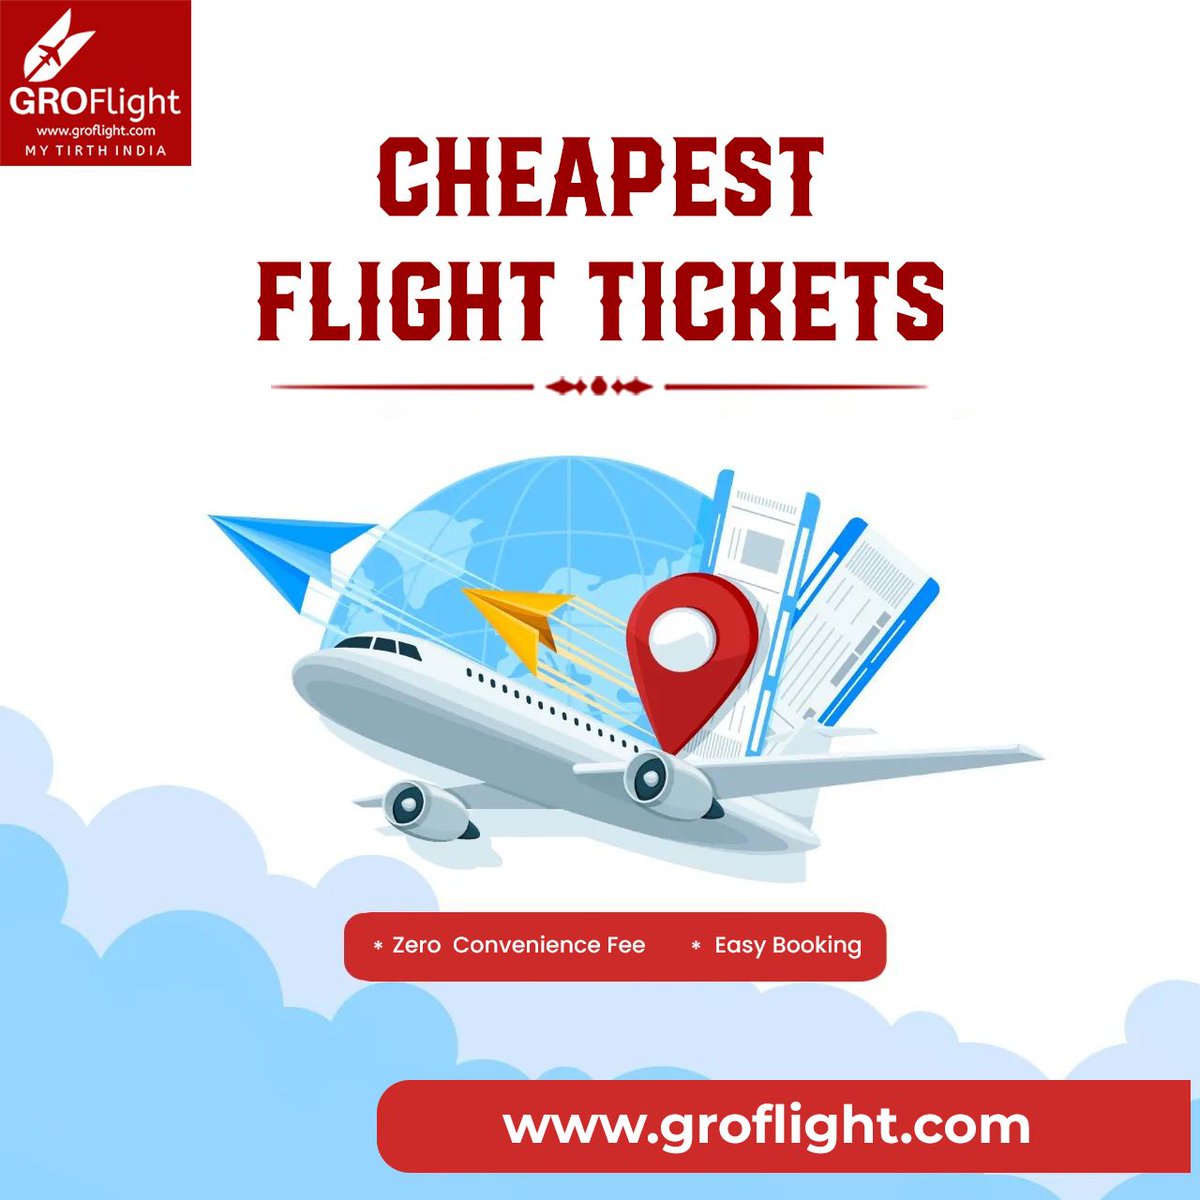 Make your trip more enjoyable with exclusive deals on flight booking. Book your trip with us NOW!!!
Book with us
📱 +91 95659 22922
📧 admin@groflight.com
🌎groflight.com
#groflight #mytirthindia  #cheapflightdeals #comfortabletravel  #lowestflightbookingdeals